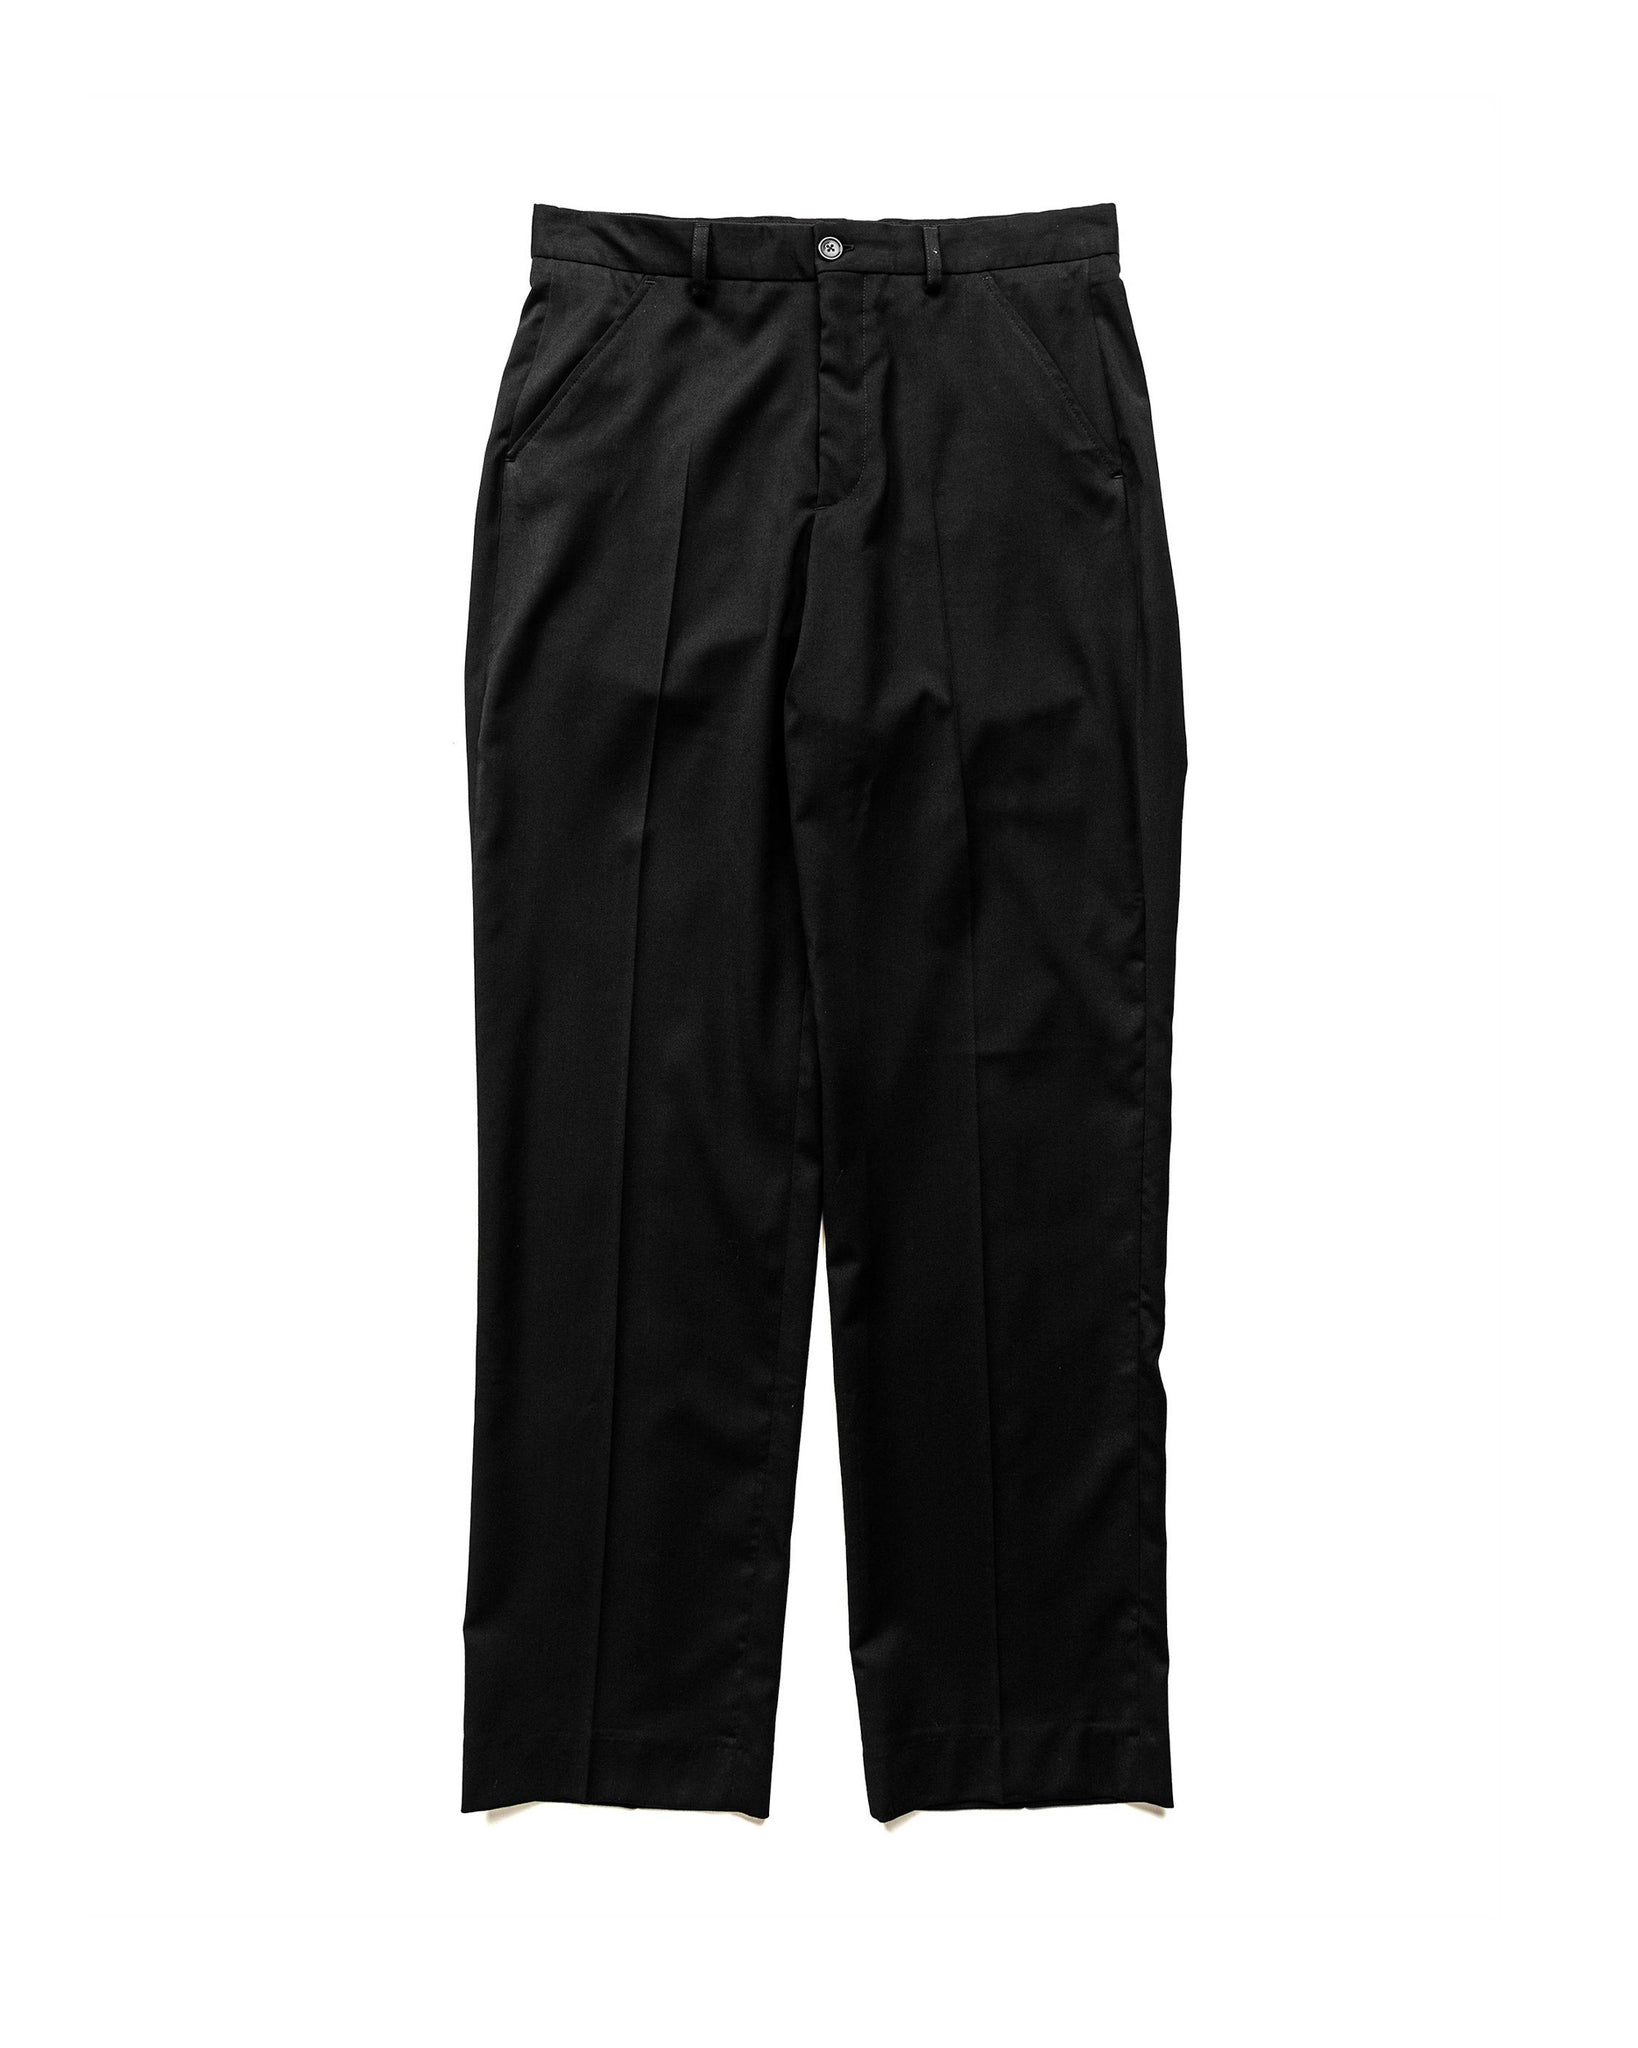 Our Legacy Chino 22 Black Worsted Wool